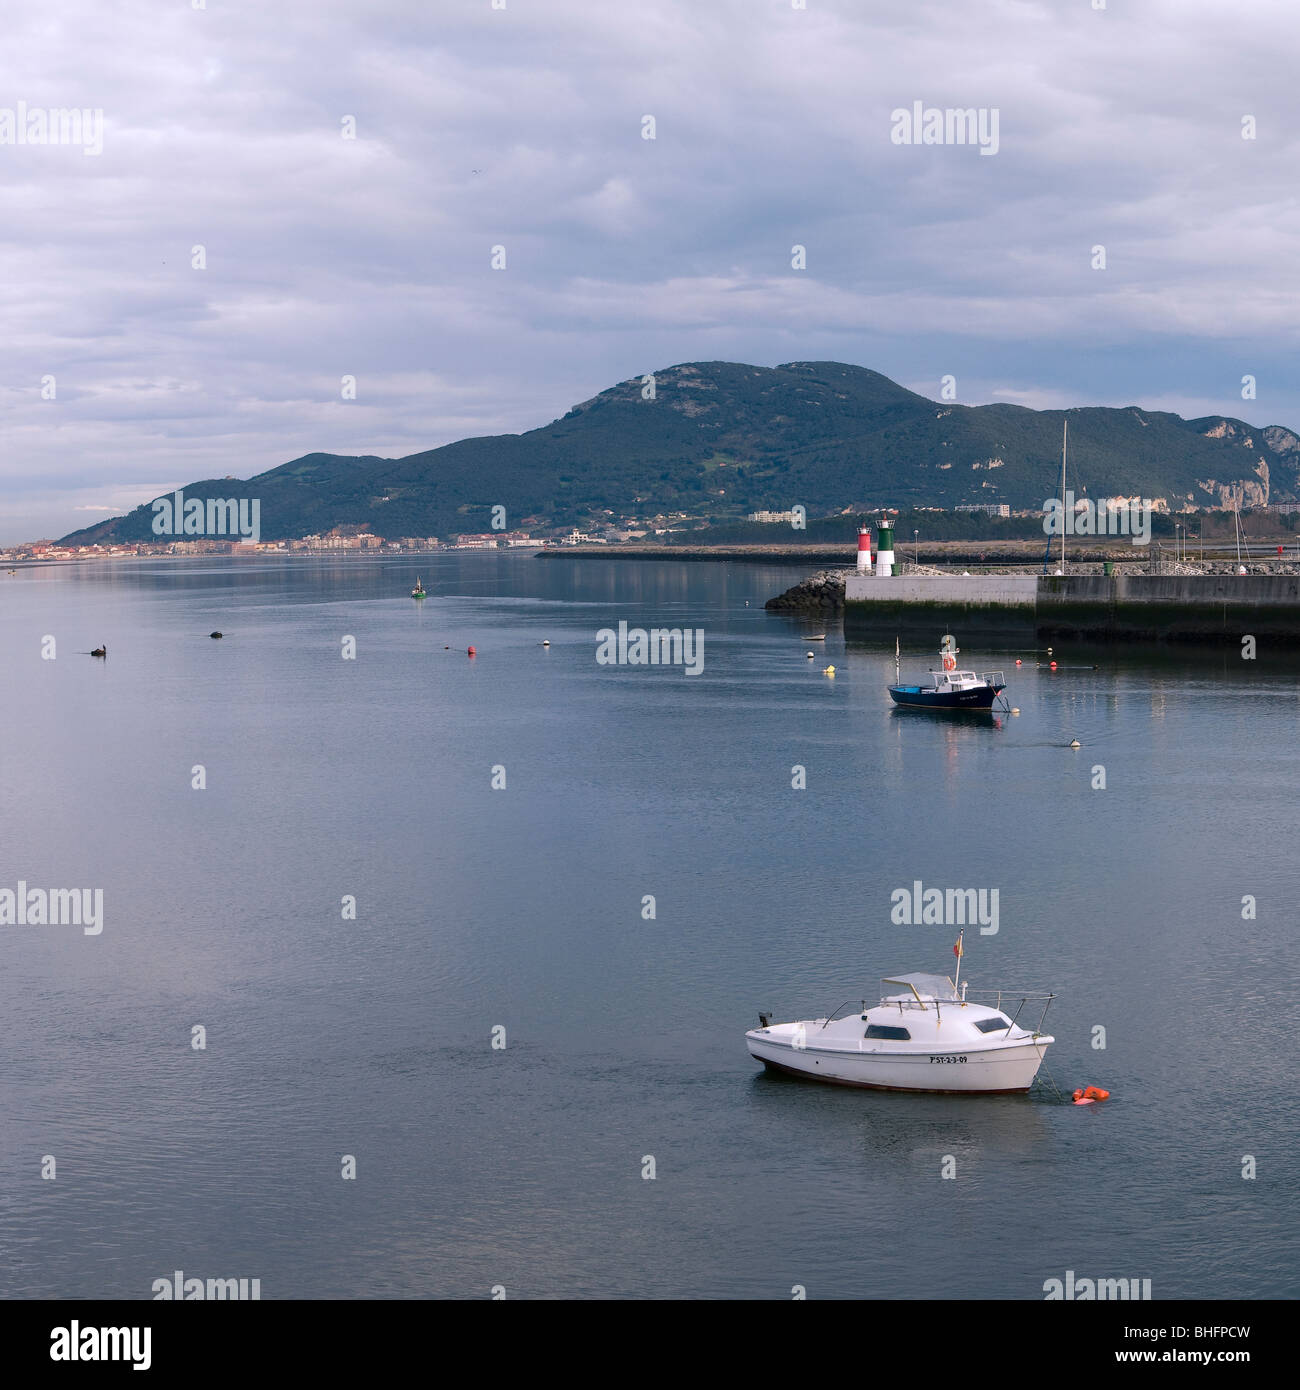 seascape with two small yachts and a mountain in the background at the entrance to the port of Colindres, Cantabria, Spain Stock Photo